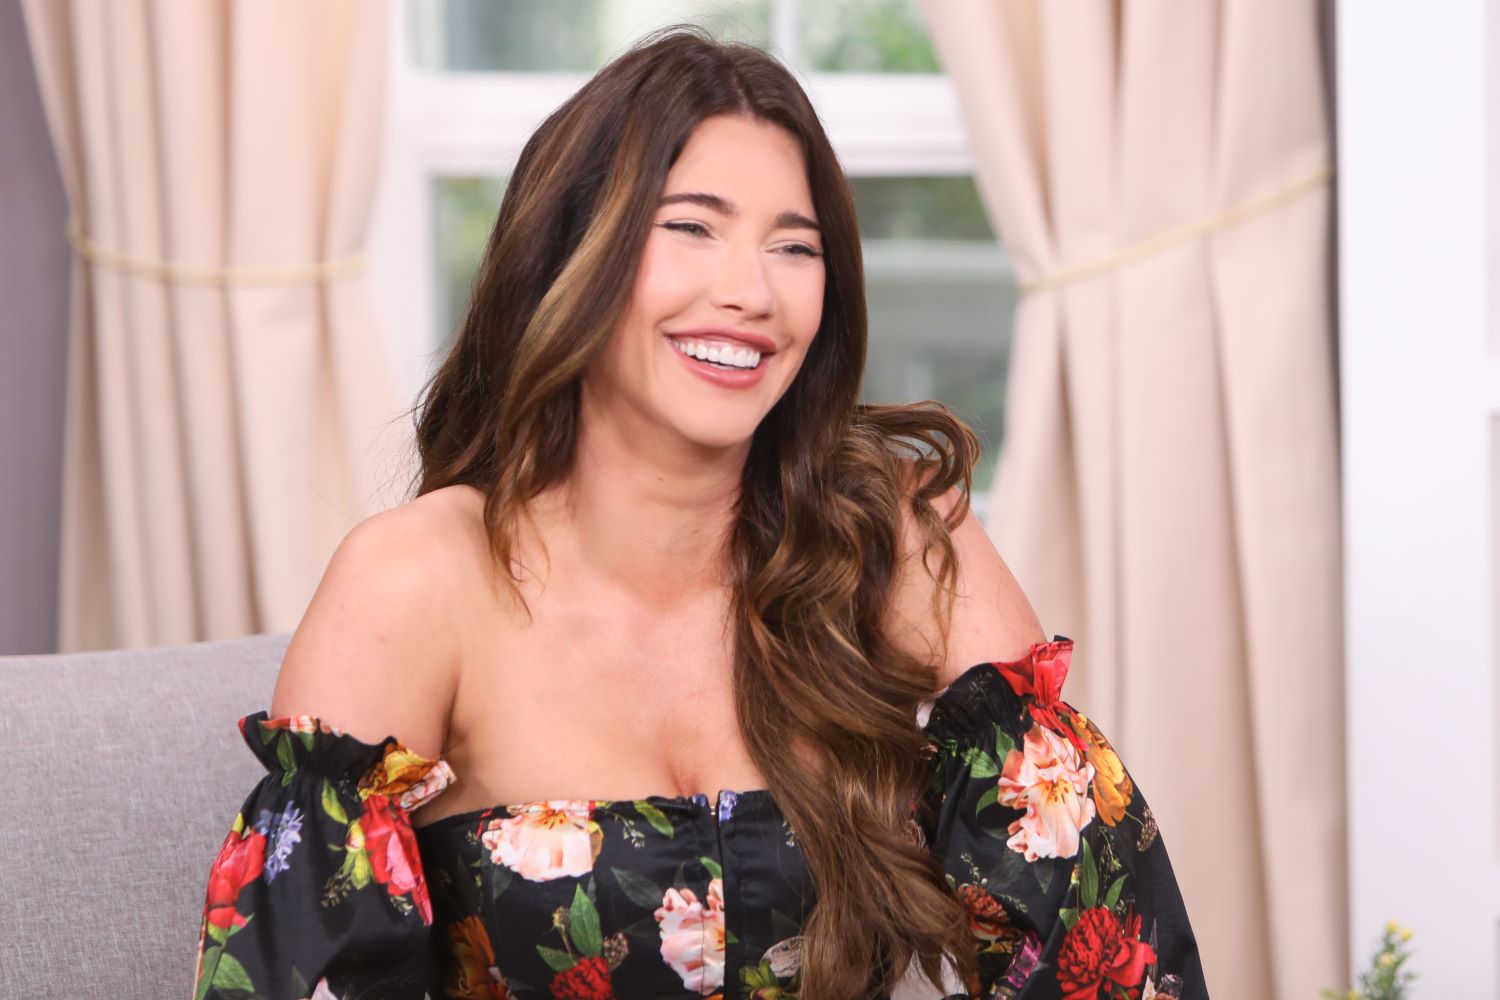 Has 'The Bold and the Beautiful' Star Jacqueline MacInnes Wood Had Any ...